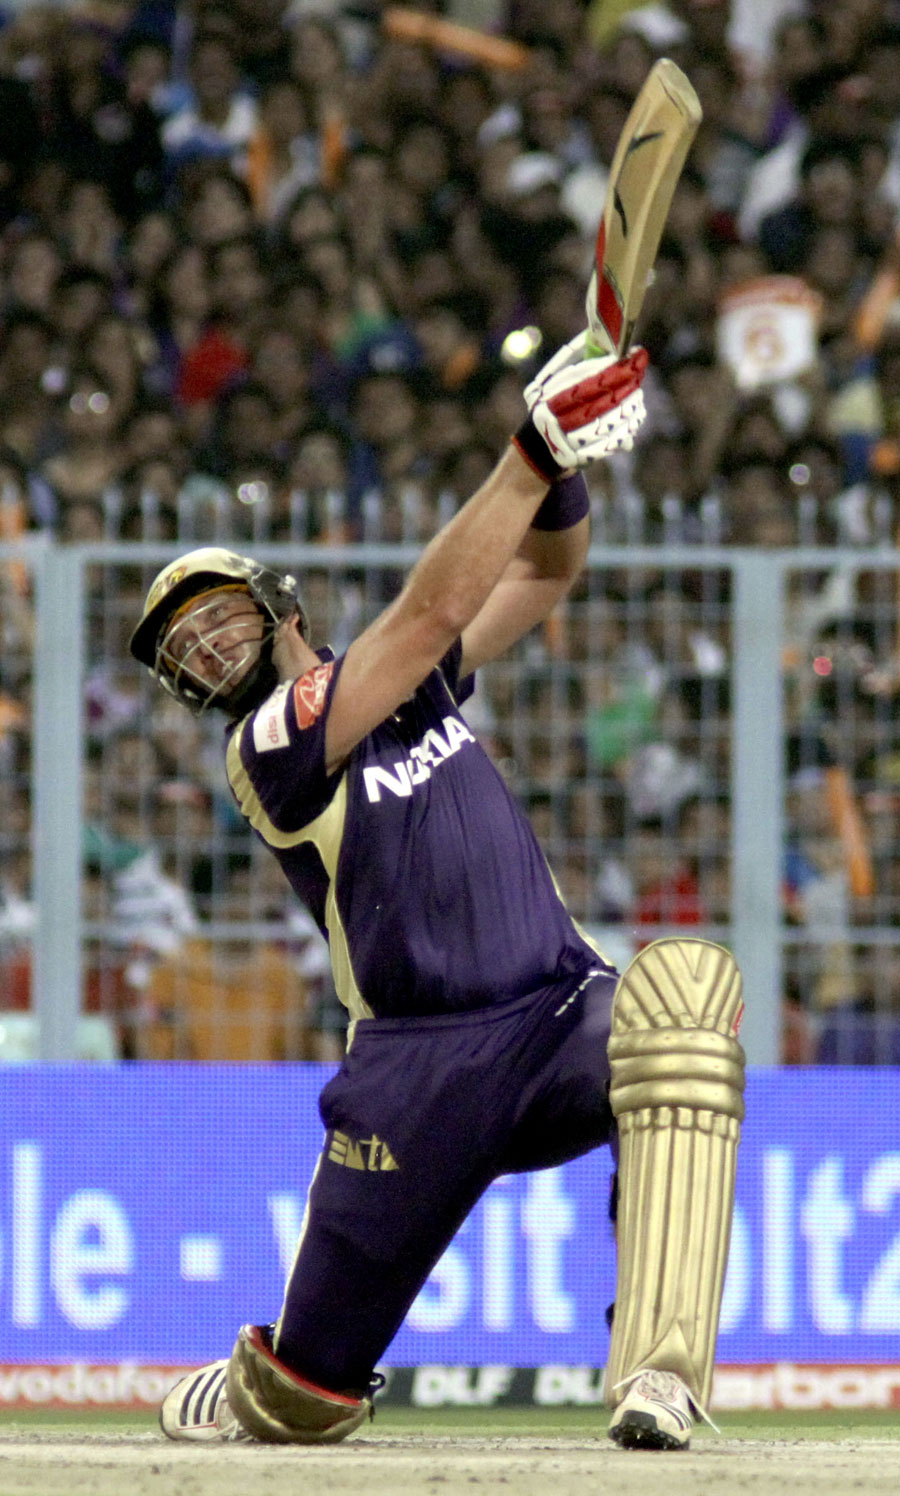 Ipl Images Kkr Ipl Hd Wallpaper And Background Photos - One Day International , HD Wallpaper & Backgrounds